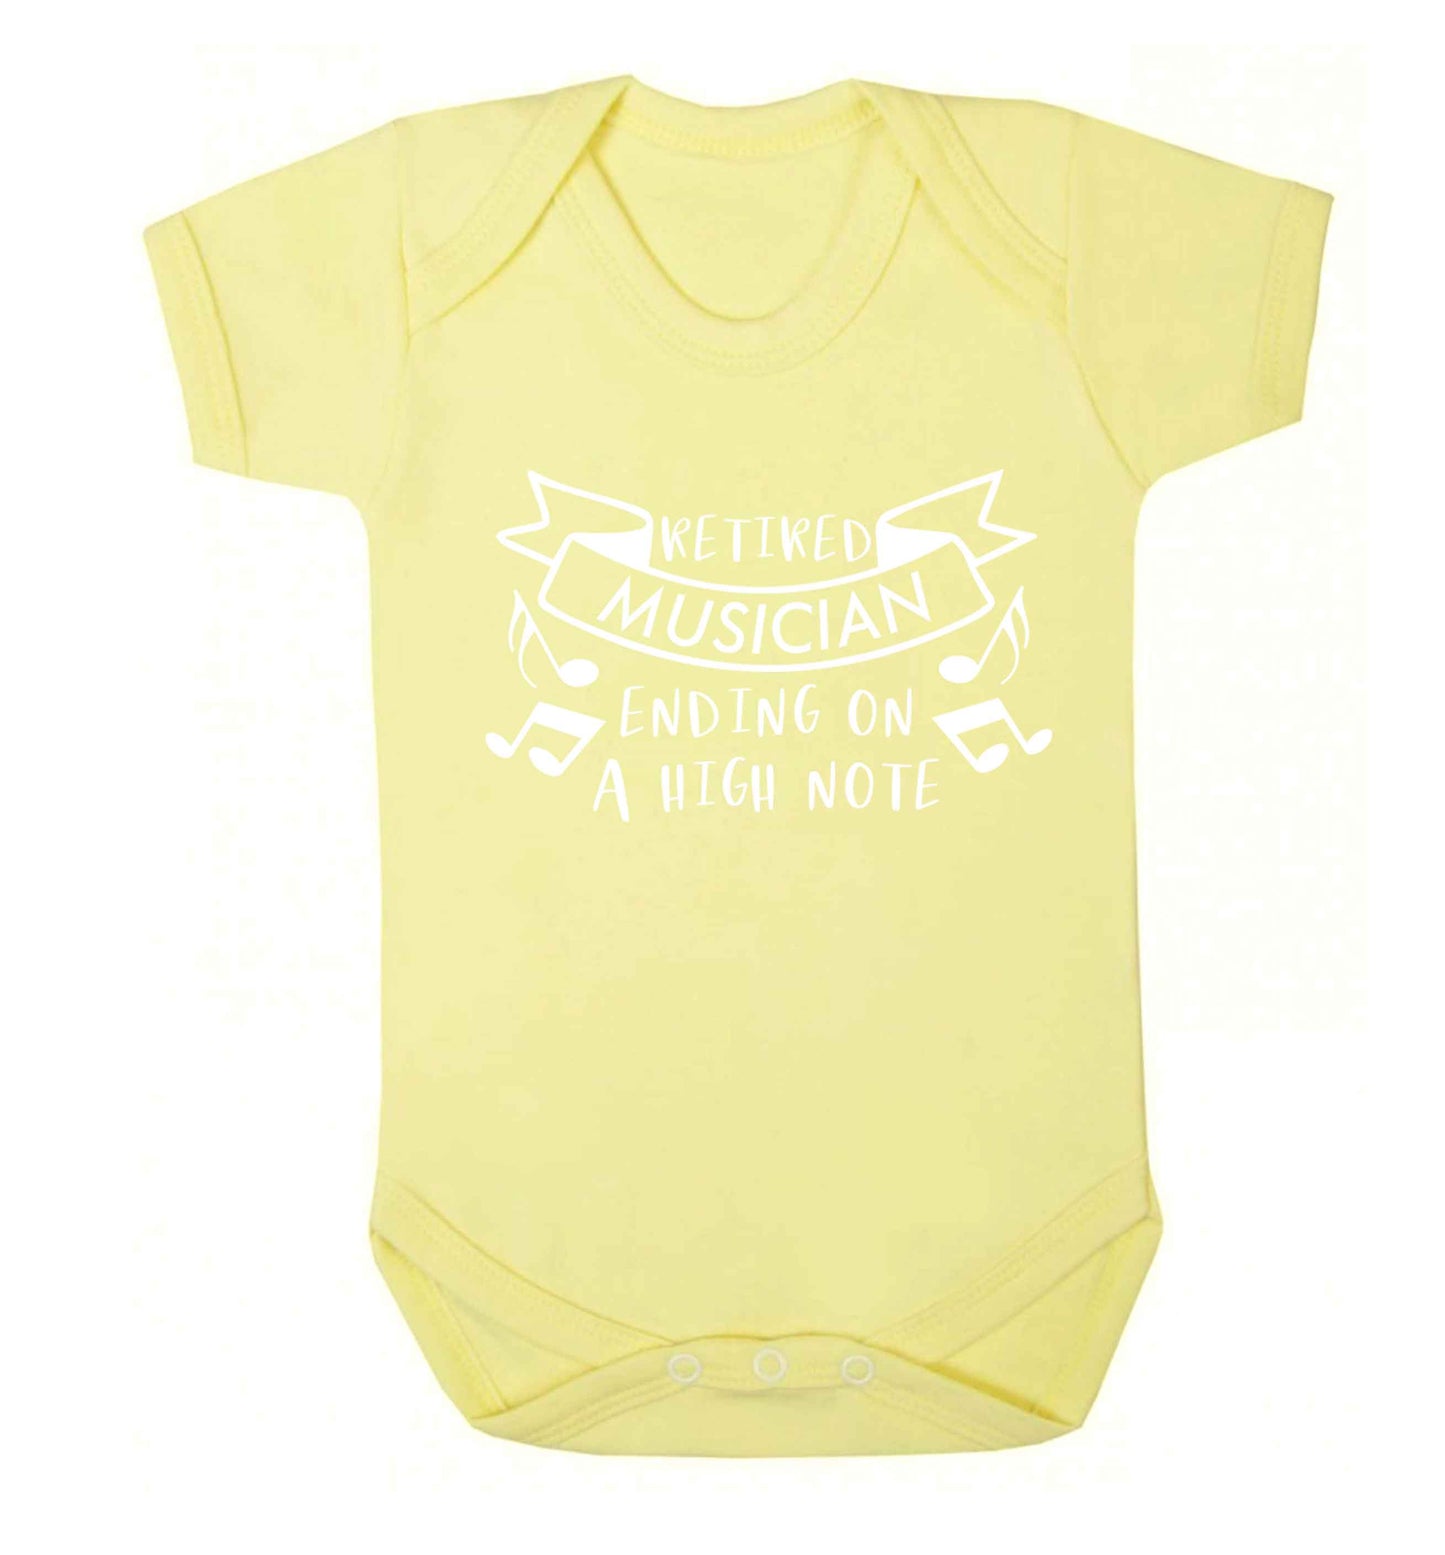 Retired musician ending on a high note Baby Vest pale yellow 18-24 months